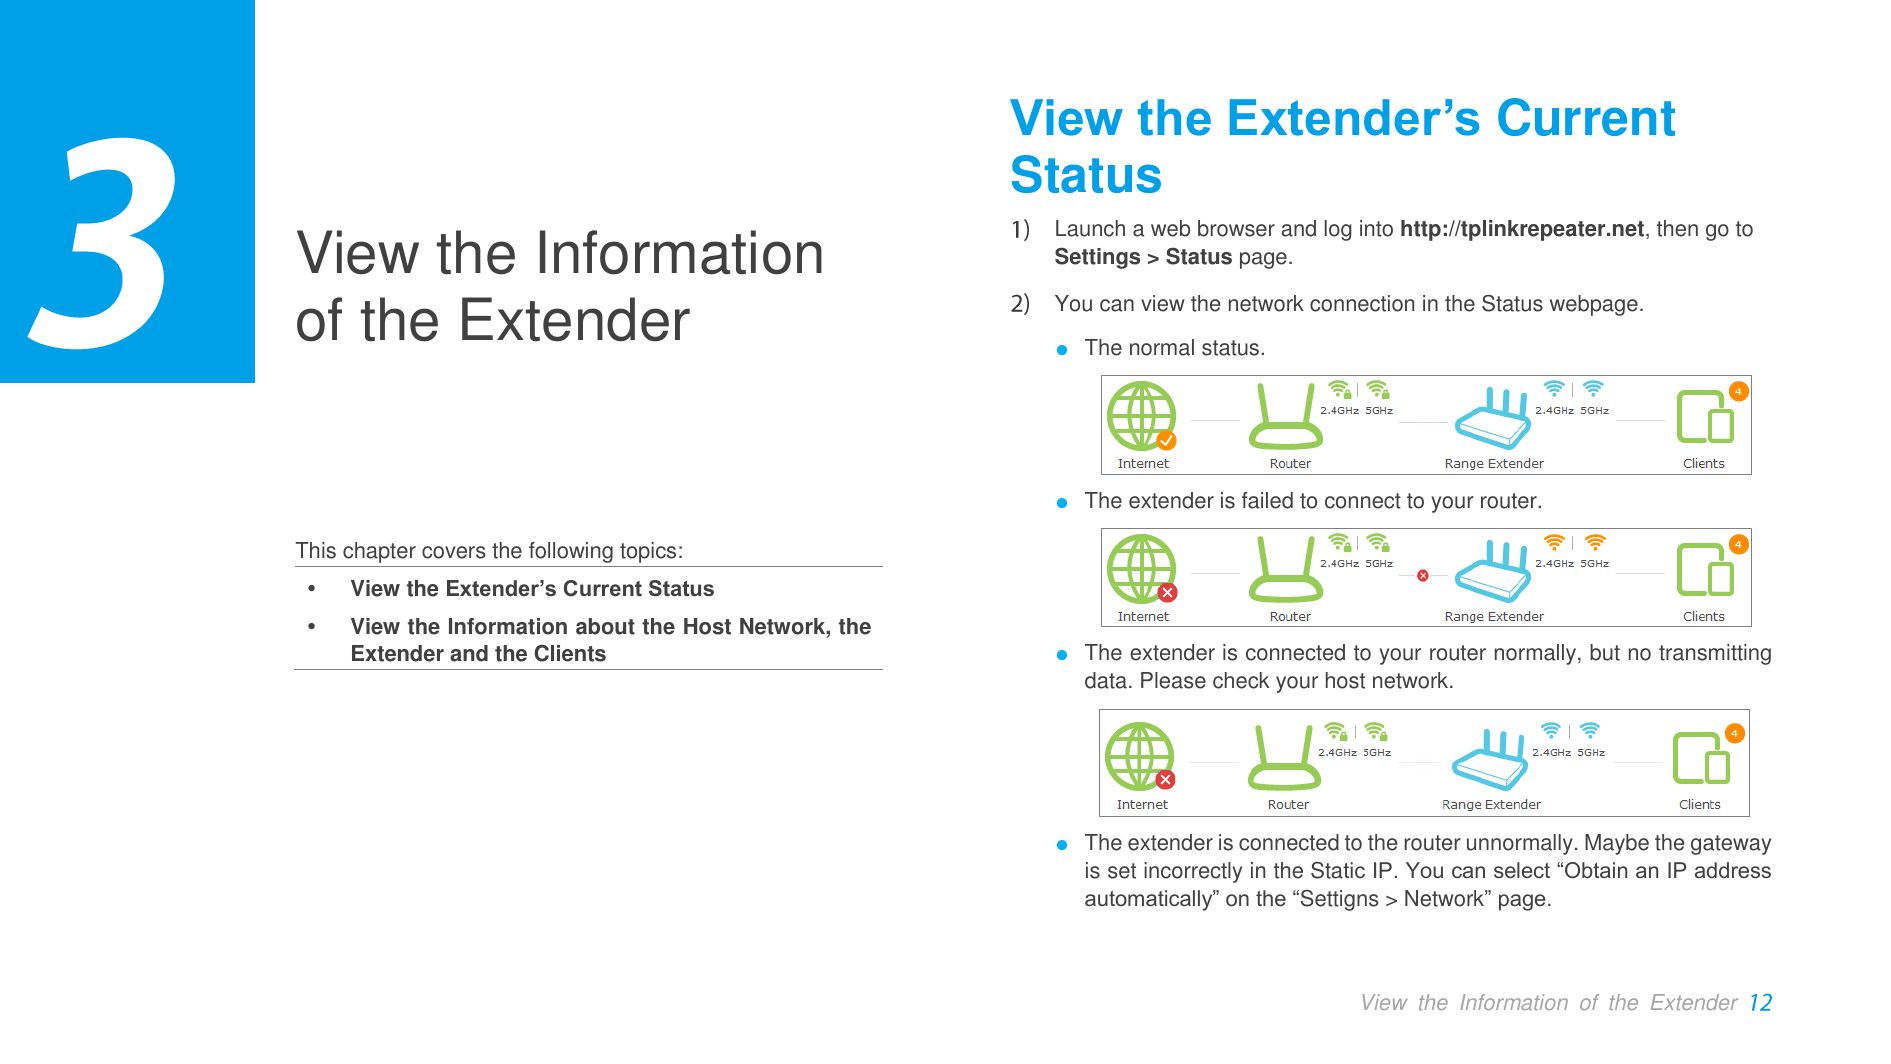  View  the  Information  of  the  Extender  View the Information of the Extender       This chapter covers the following topics:  View the Extender’s Current Status  View the Information about the Host Network, the Extender and the Clients View the Extender’s Current Status  Launch a web browser and log into http://tplinkrepeater.net, then go to Settings &gt; Status page.  You can view the network connection in the Status webpage. ● The normal status.  ● The extender is failed to connect to your router.  ● The extender is connected to your router normally, but no transmitting data. Please check your host network.     ● The extender is connected to the router unnormally. Maybe the gateway is set incorrectly in the Static IP. You can select “Obtain an IP address automatically” on the “Settigns &gt; Network” page. 3 